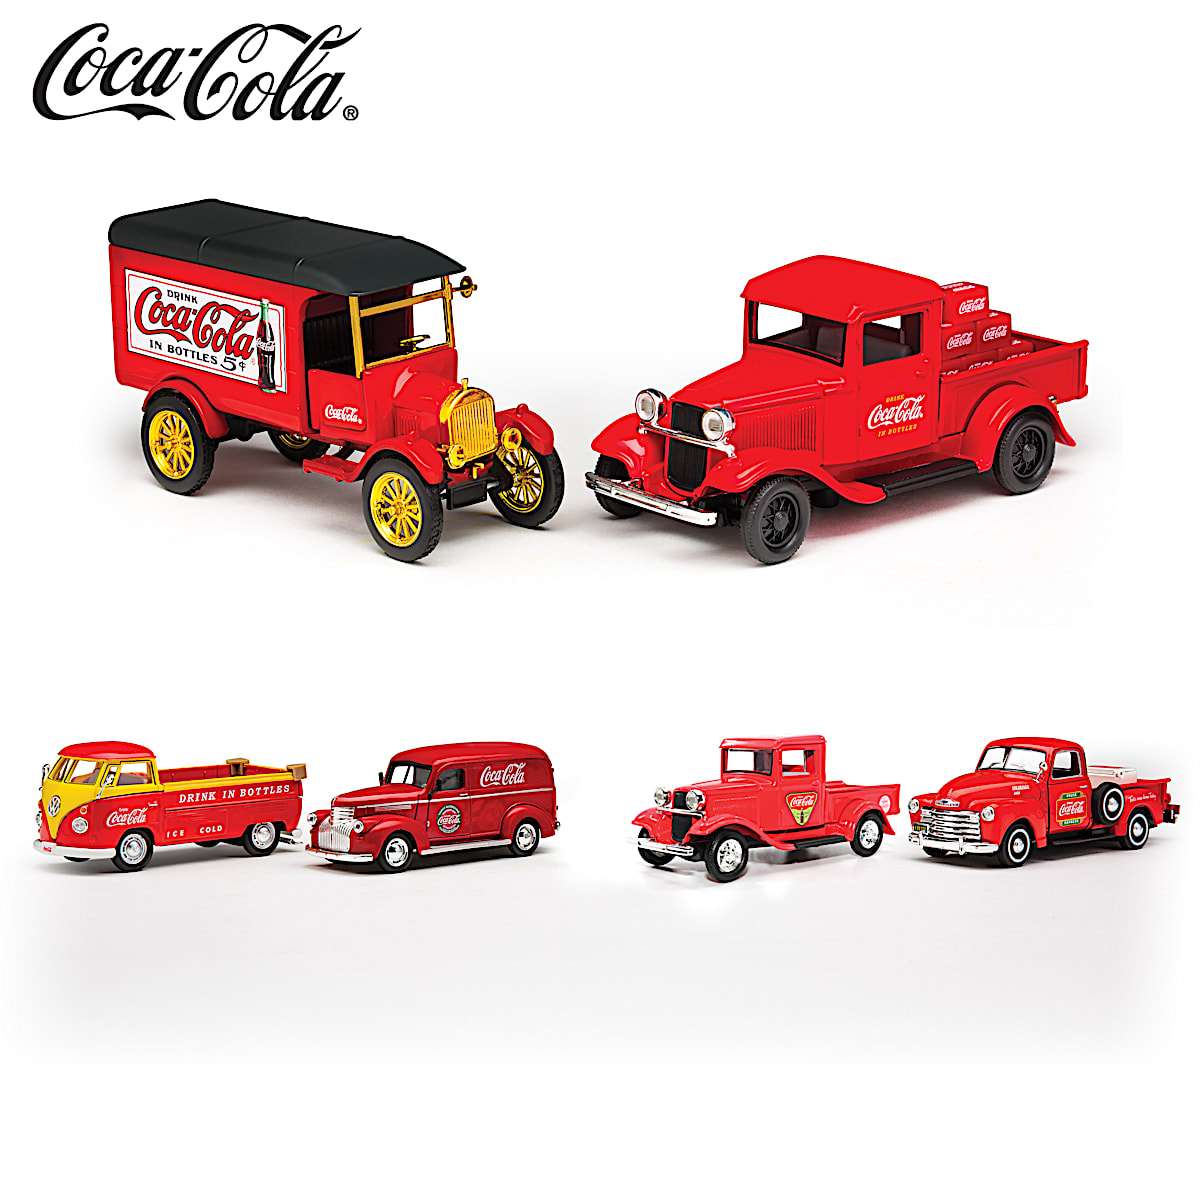 Travel The Road To Happiness With COCA-COLA 1:43-Scale Diecast